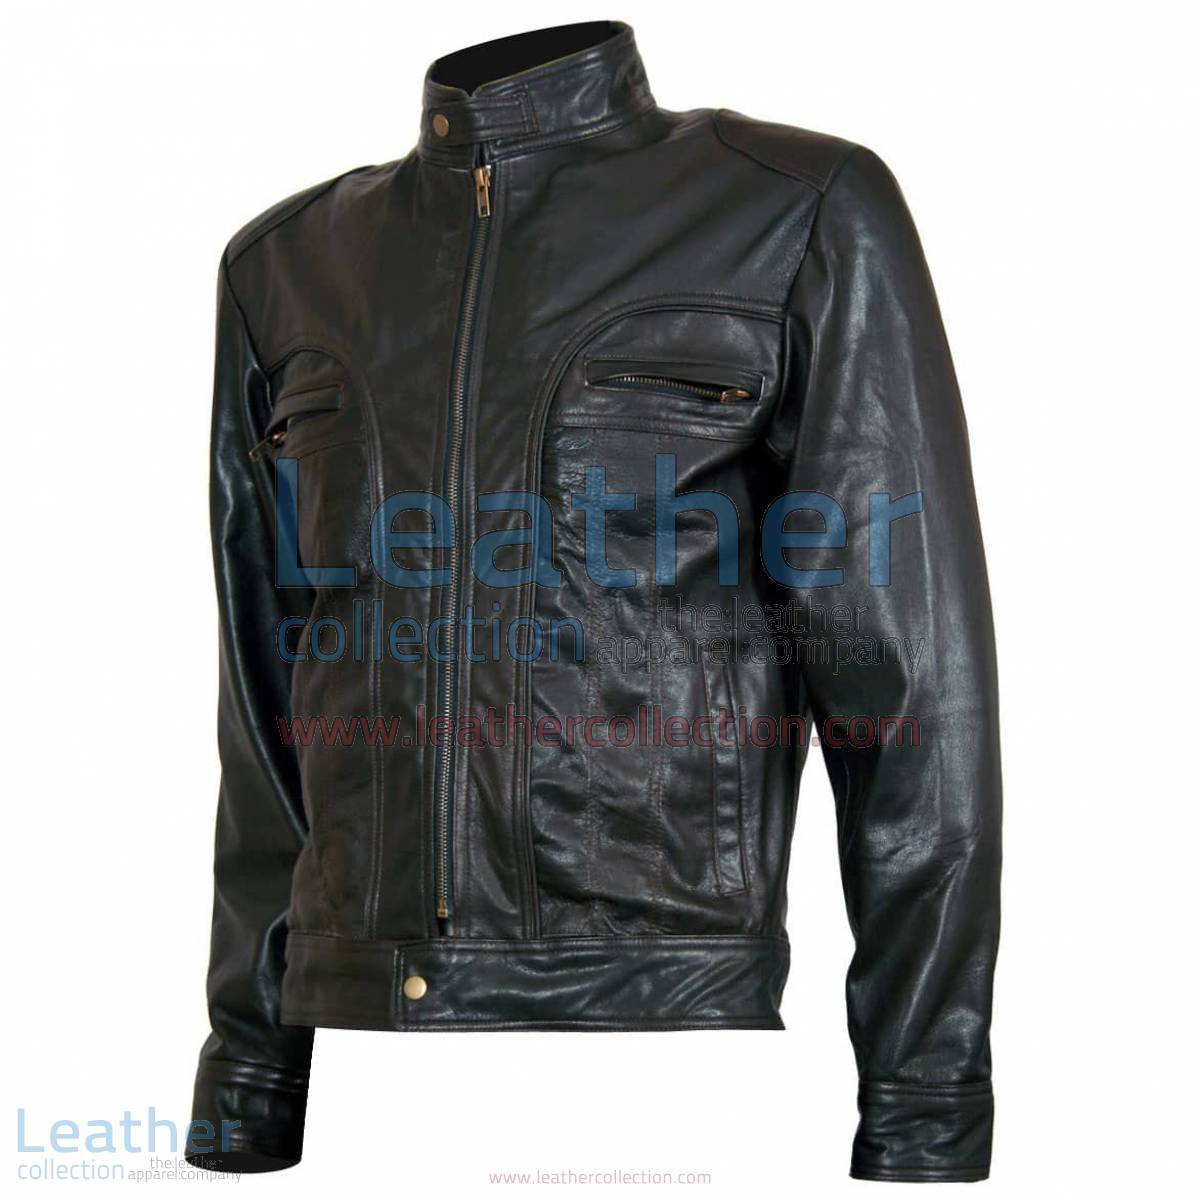 Ghosts of Girlfriends Past “Matthew” Leather Jacket | leather jackets,celebs jackets